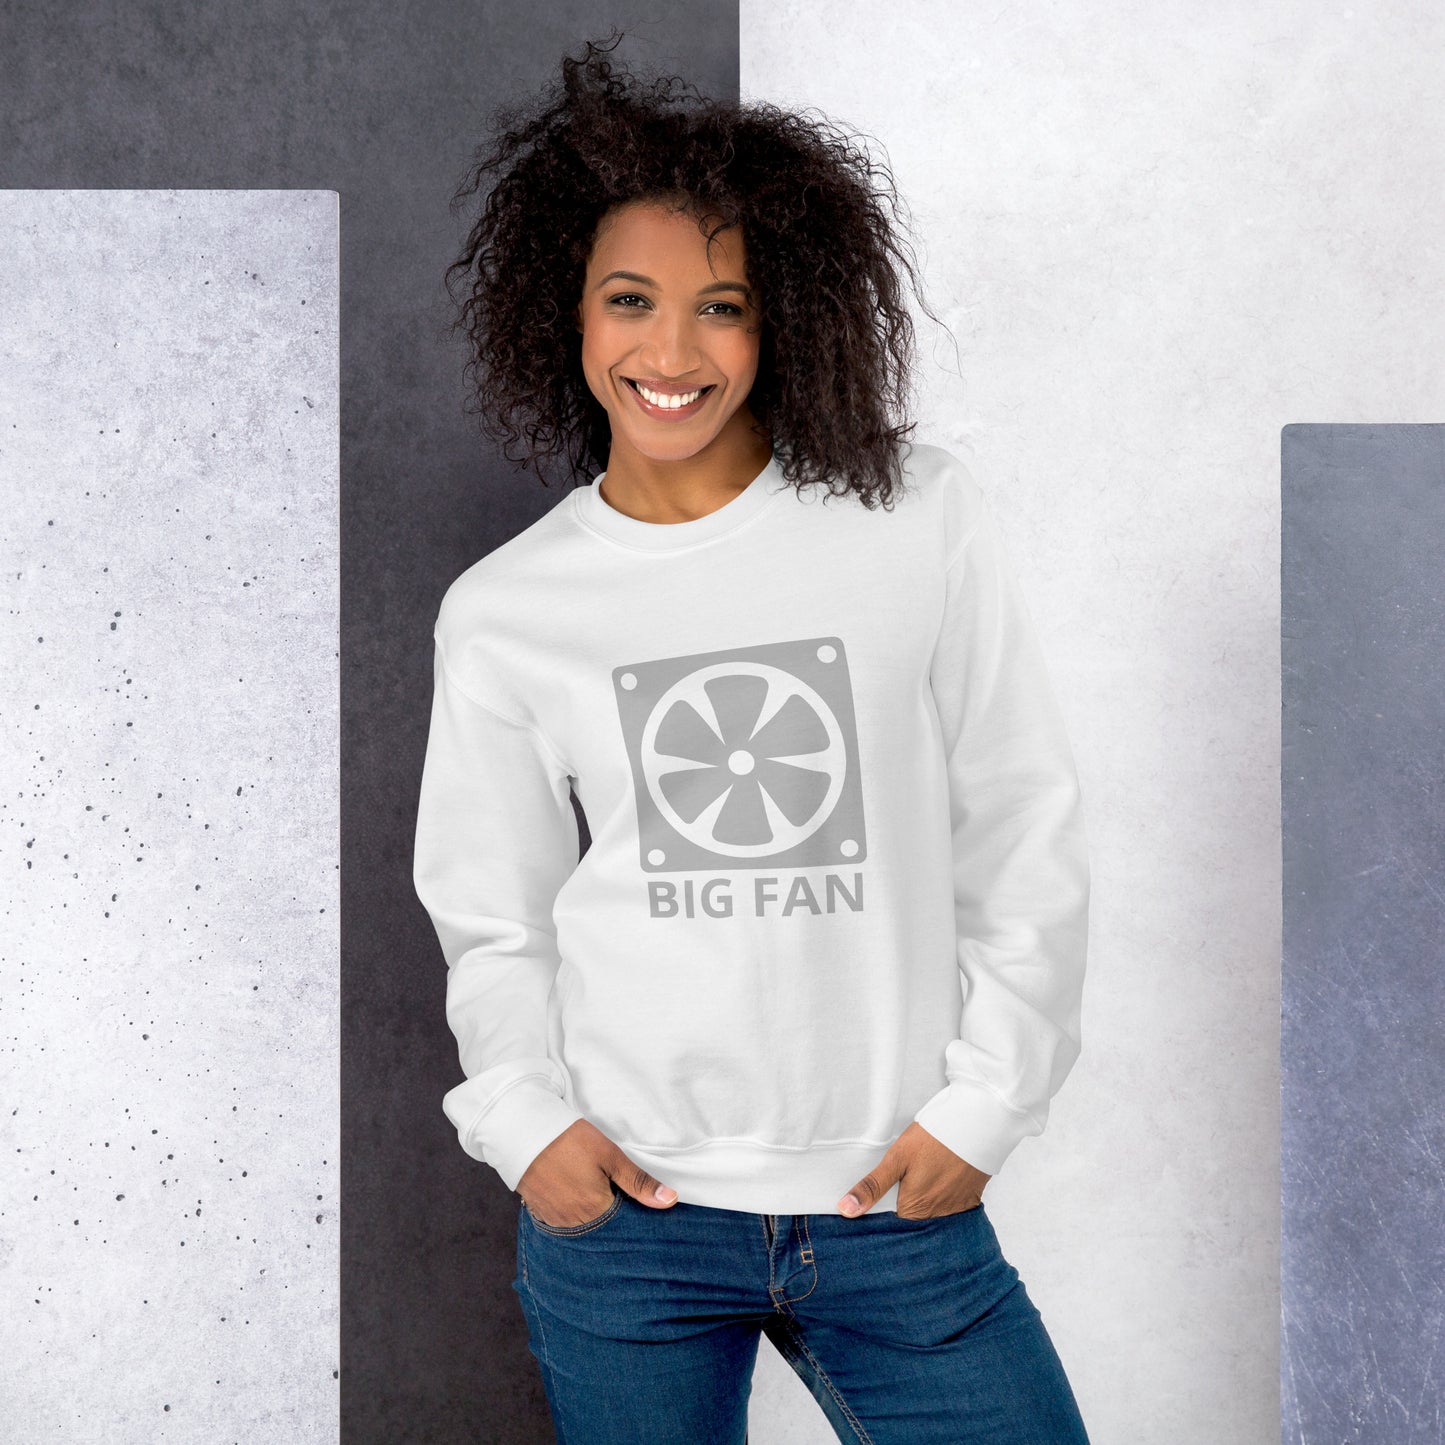 Women with white sweatshirt with image of a big computer fan and the text "BIG FAN"